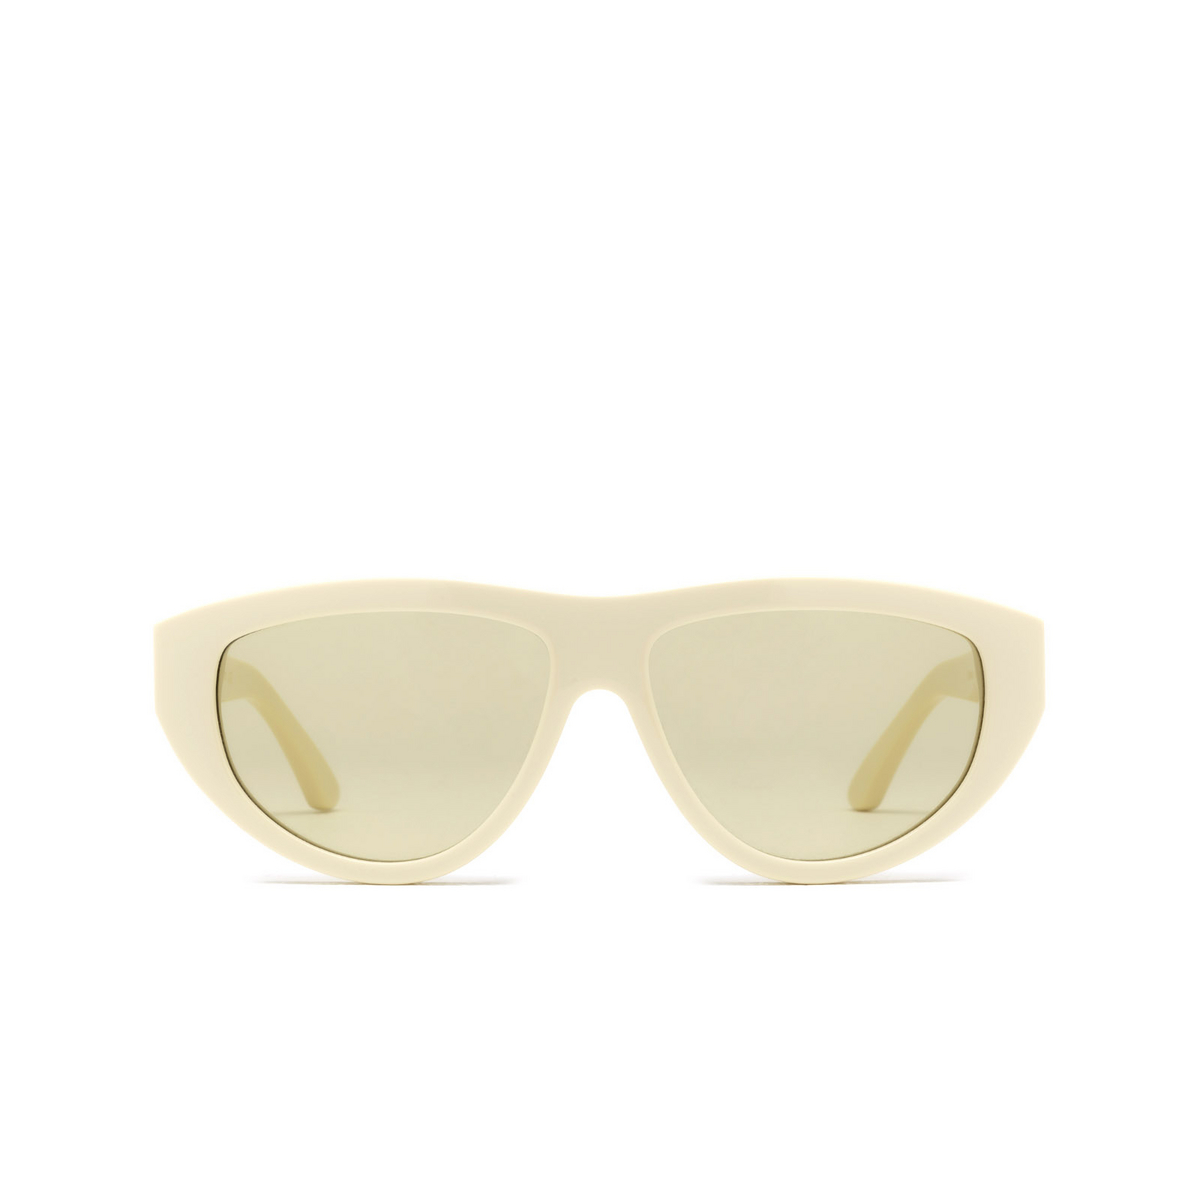 Huma® Oval Sunglasses: Viko color Ivory 07 - front view.